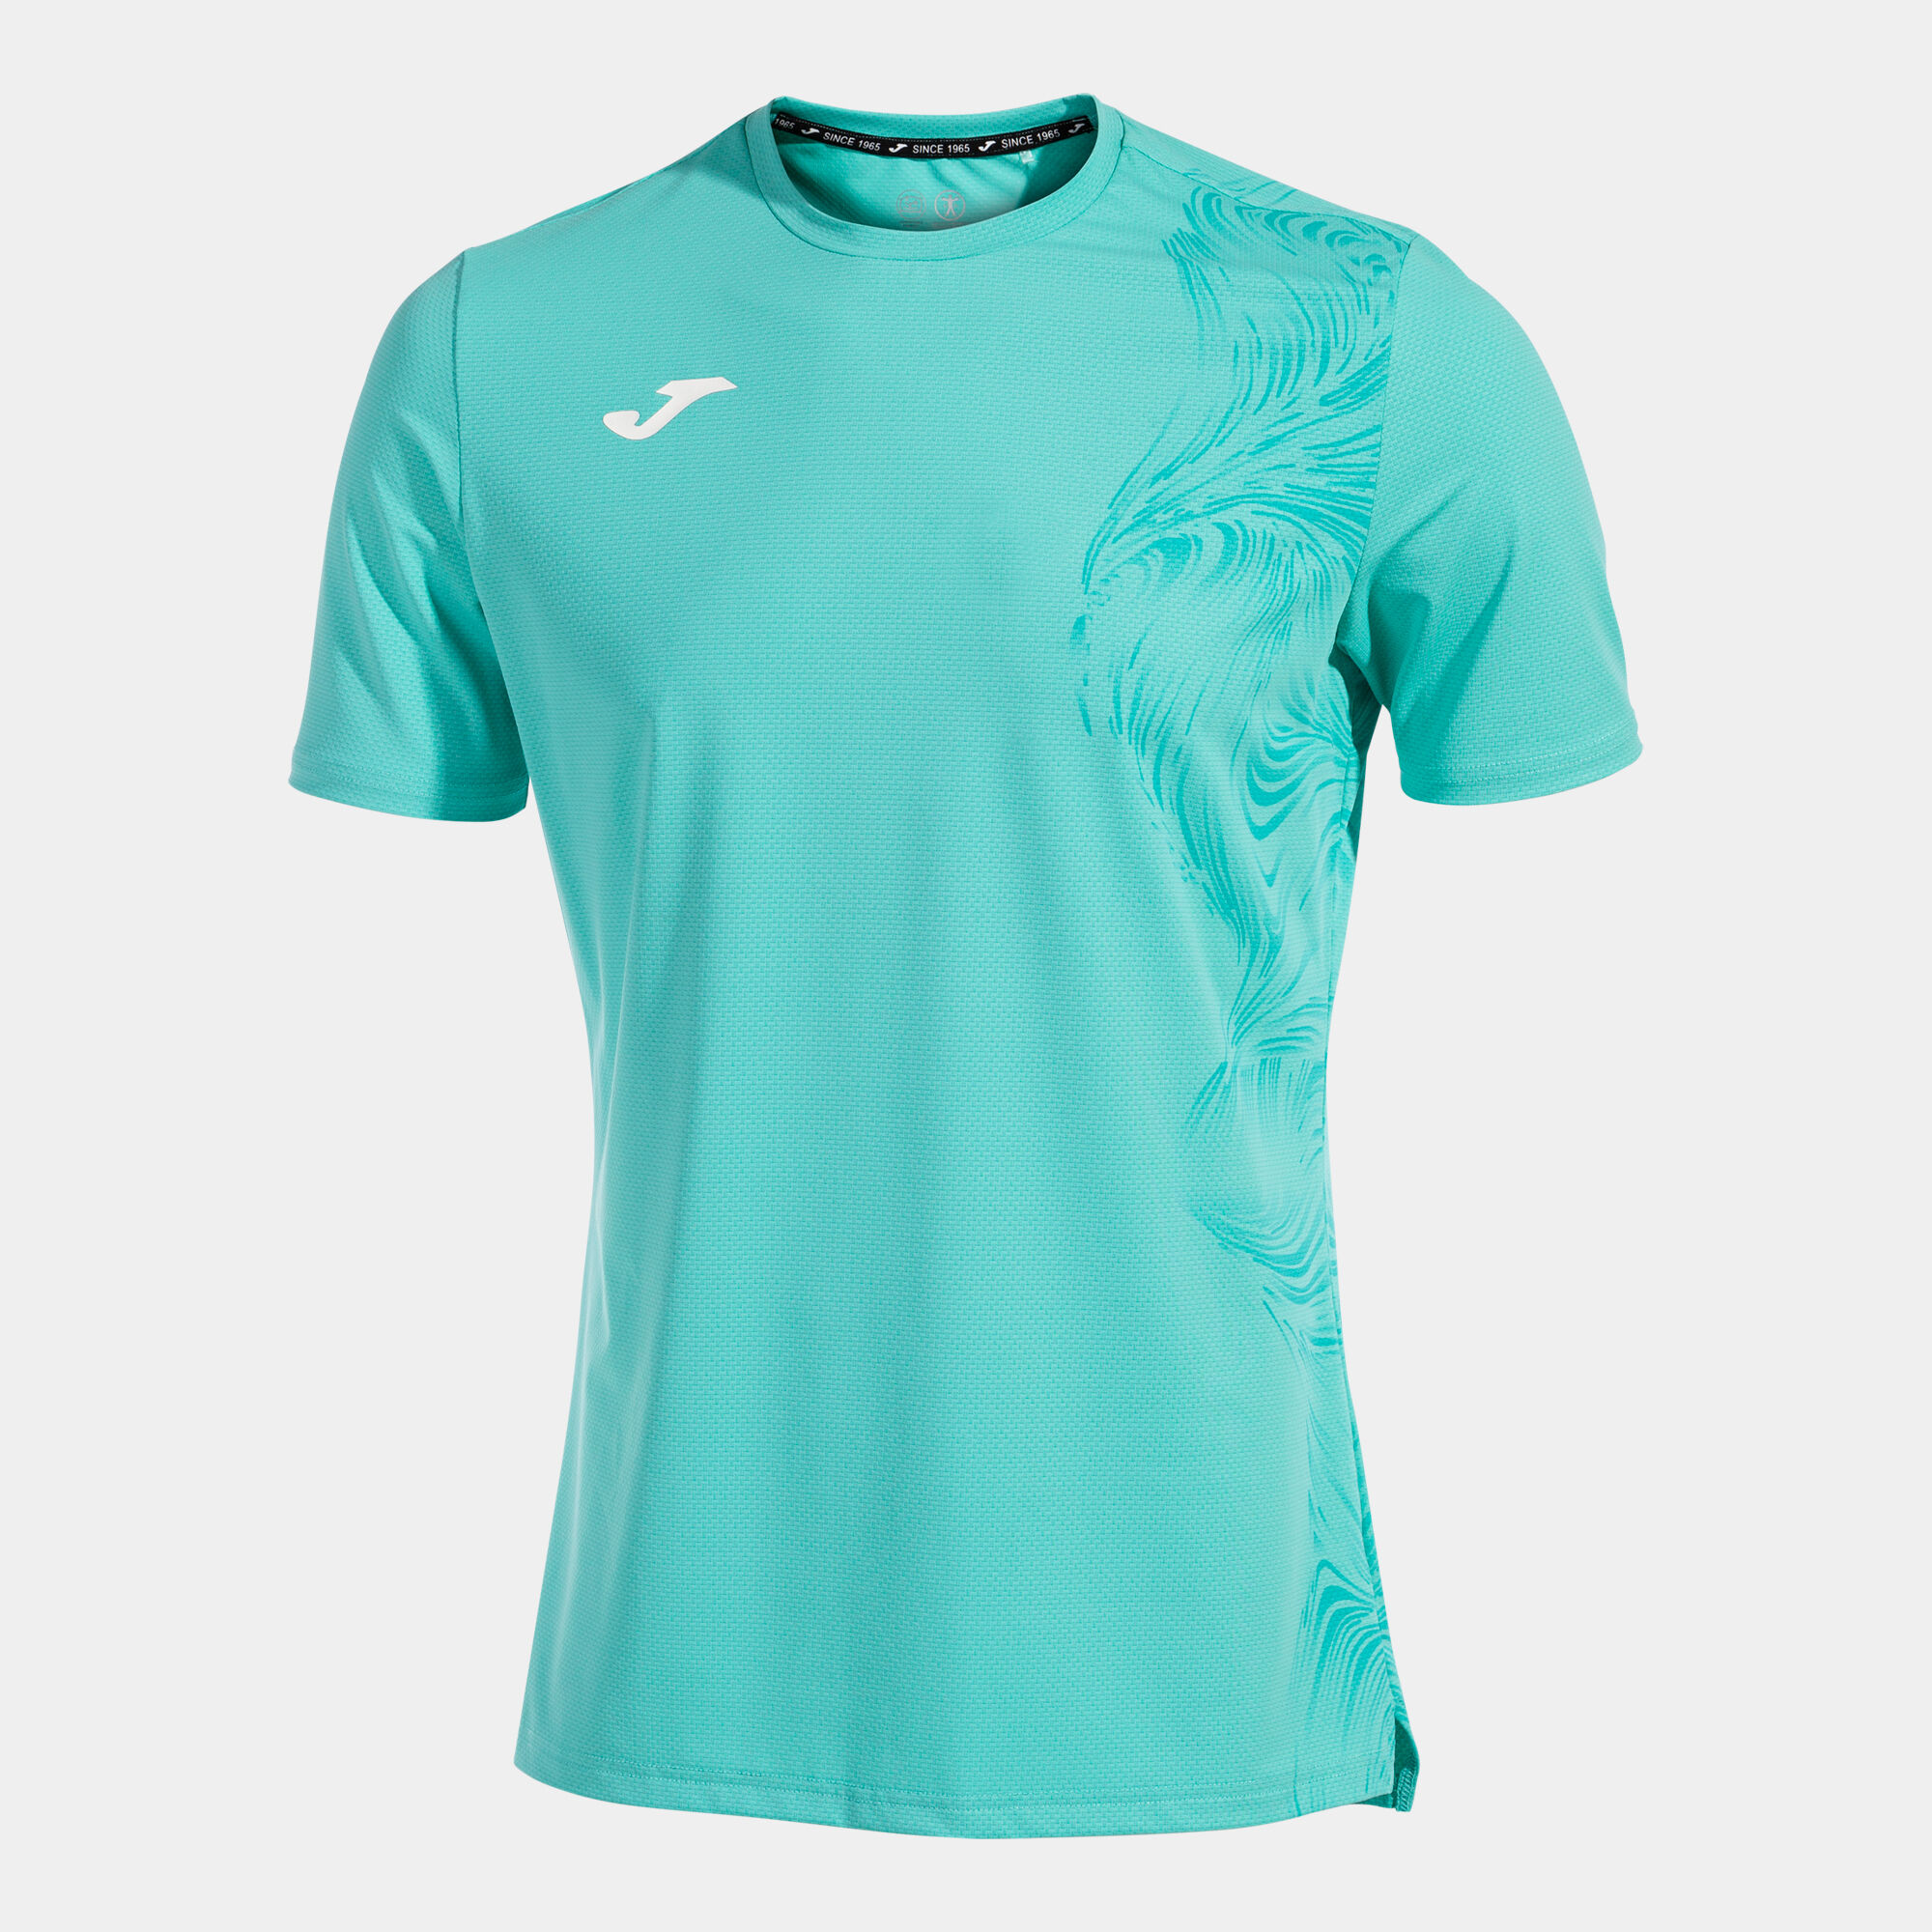 Maillot manches courtes homme Challenge turquoise